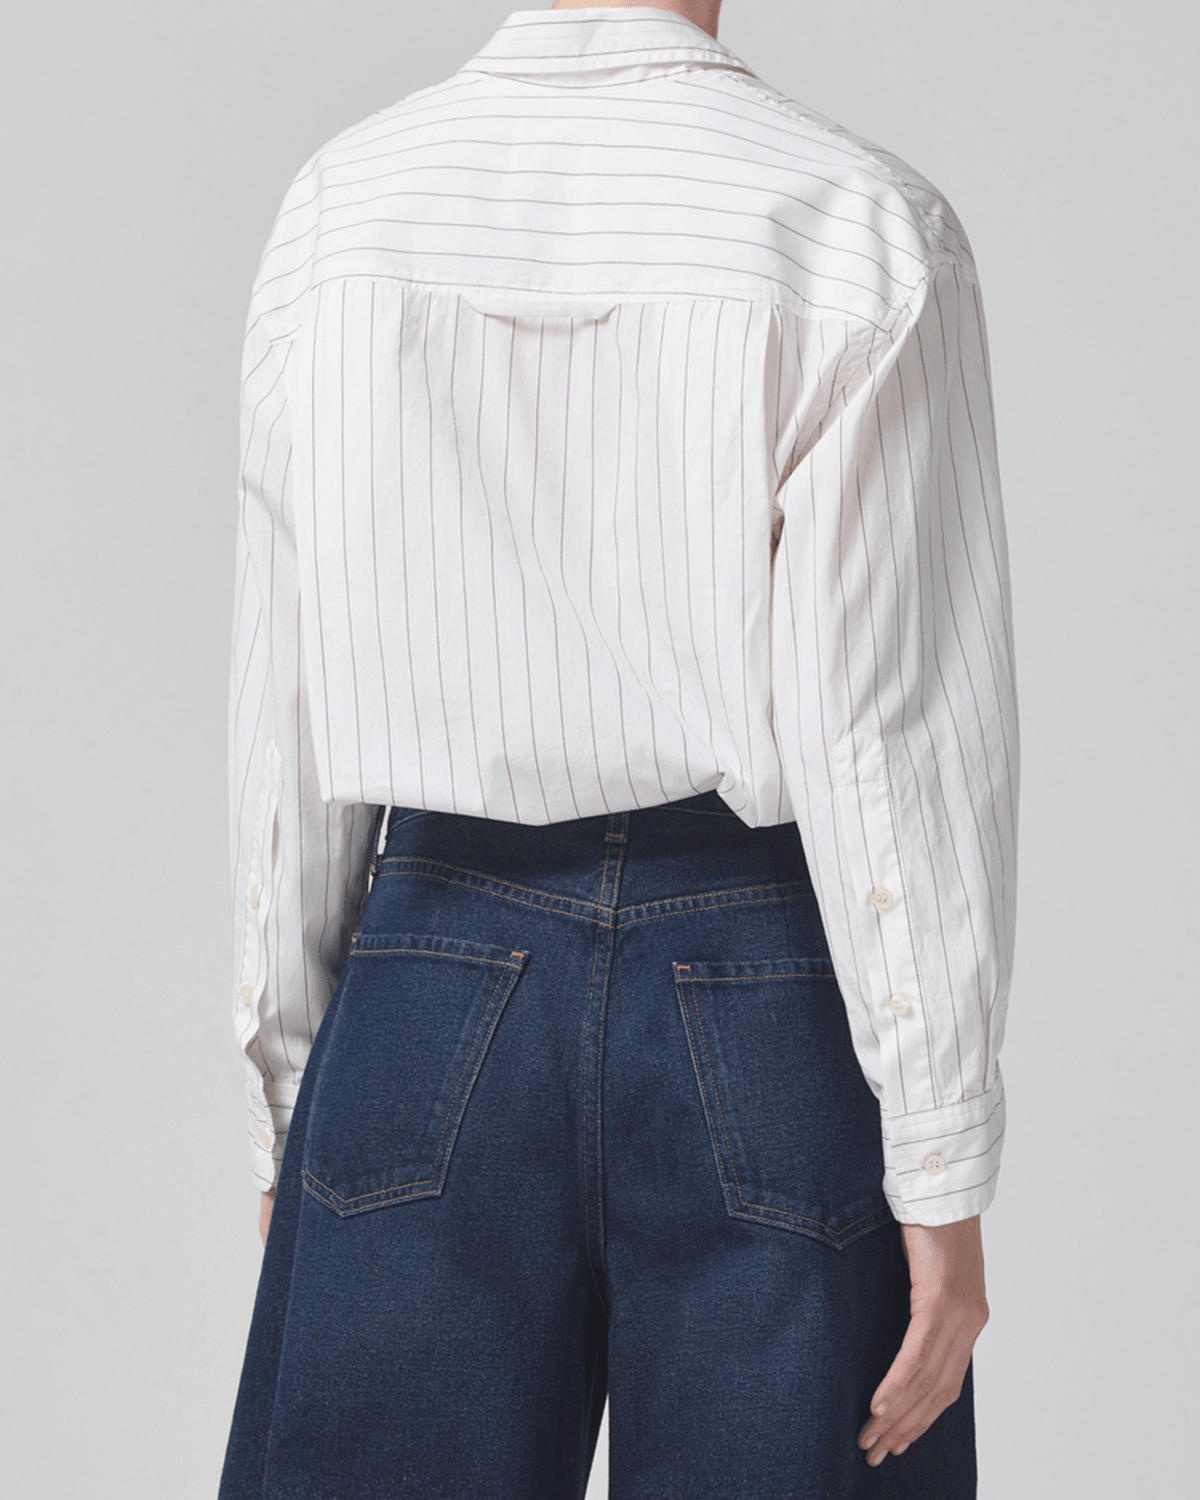 Citizens of Humanity Clothing Kayla Shirt in Bitter Chocolate Stripe